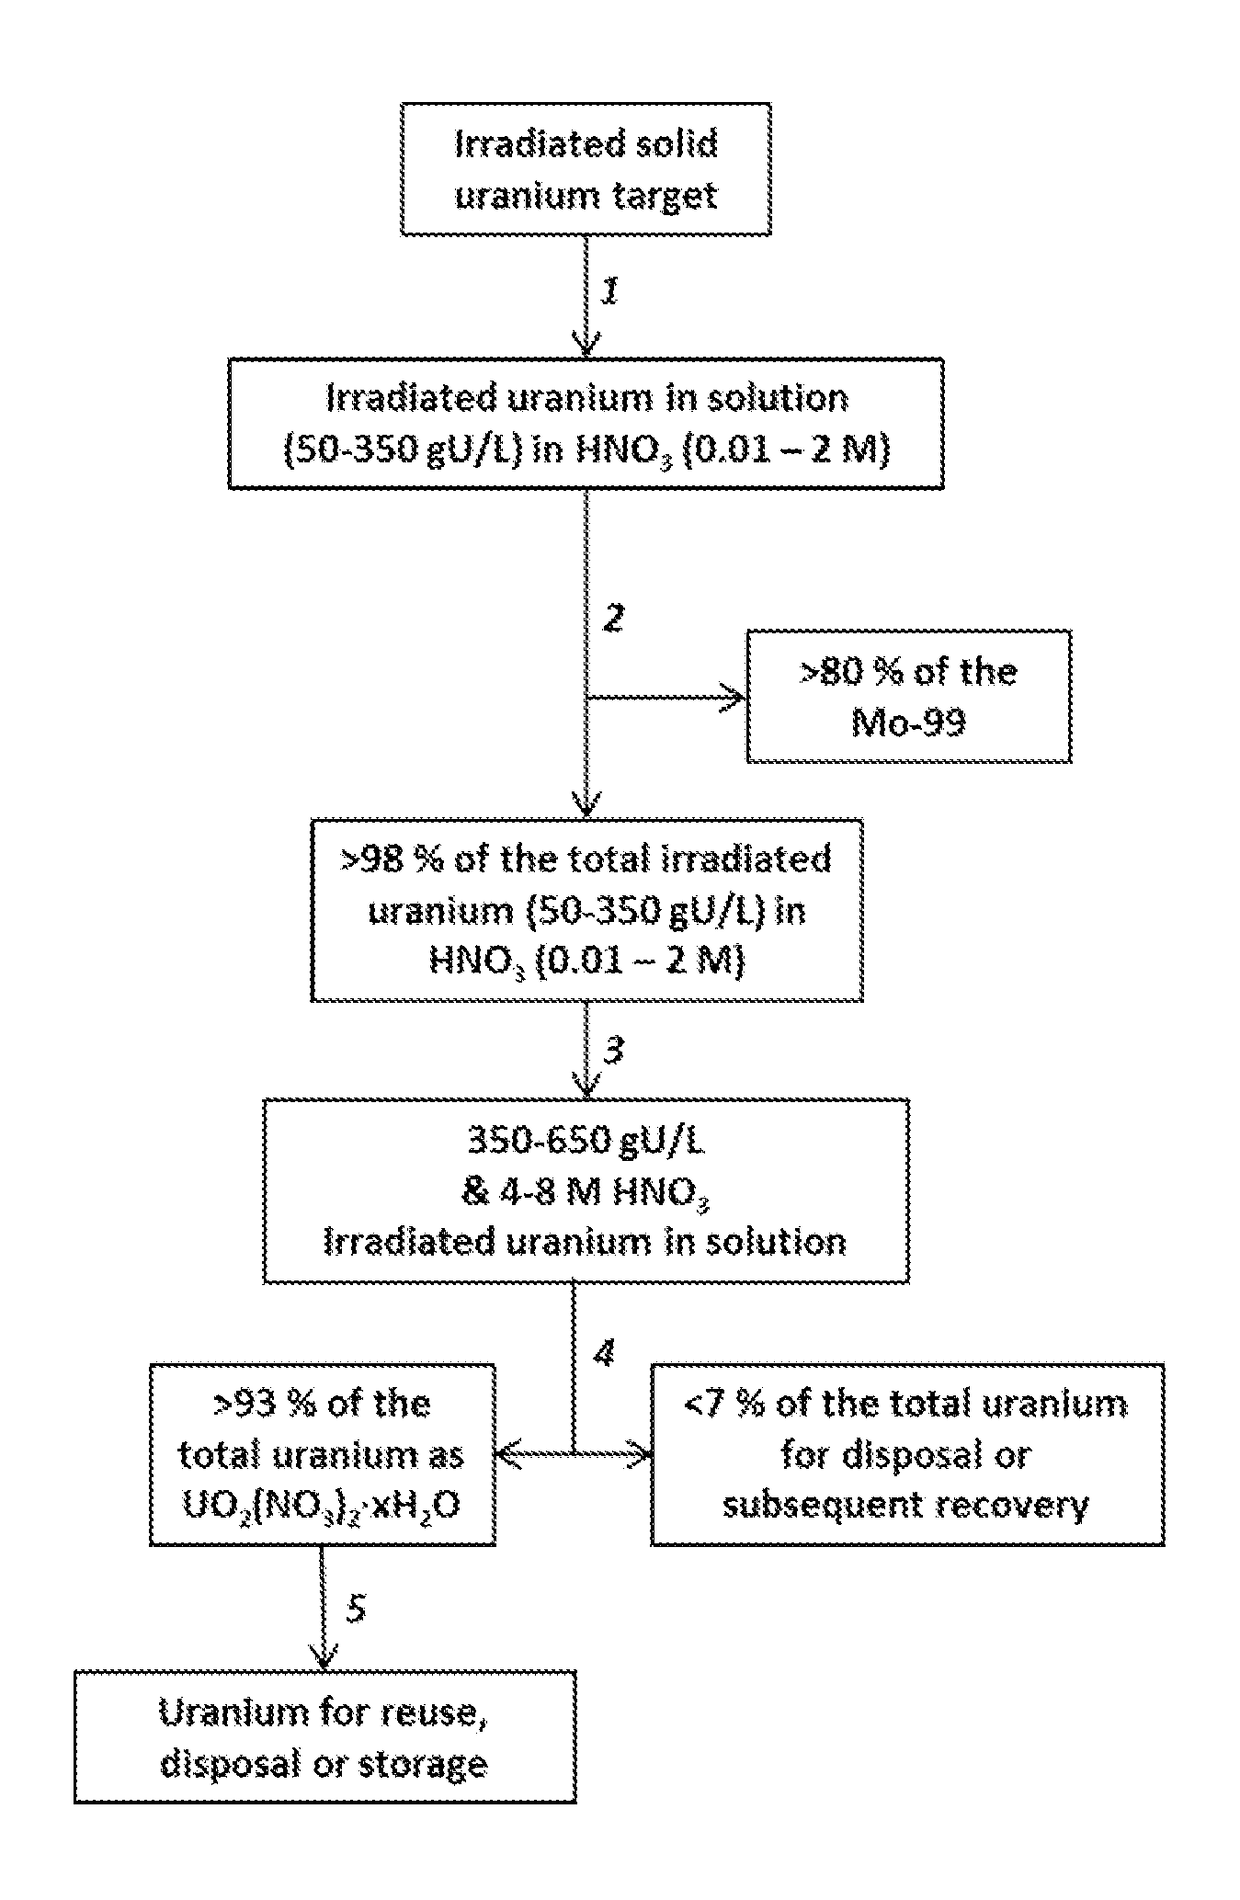 Recovery of uranium from an irradiated solid target after removal of molybdenum-99 produced from the irradiated target